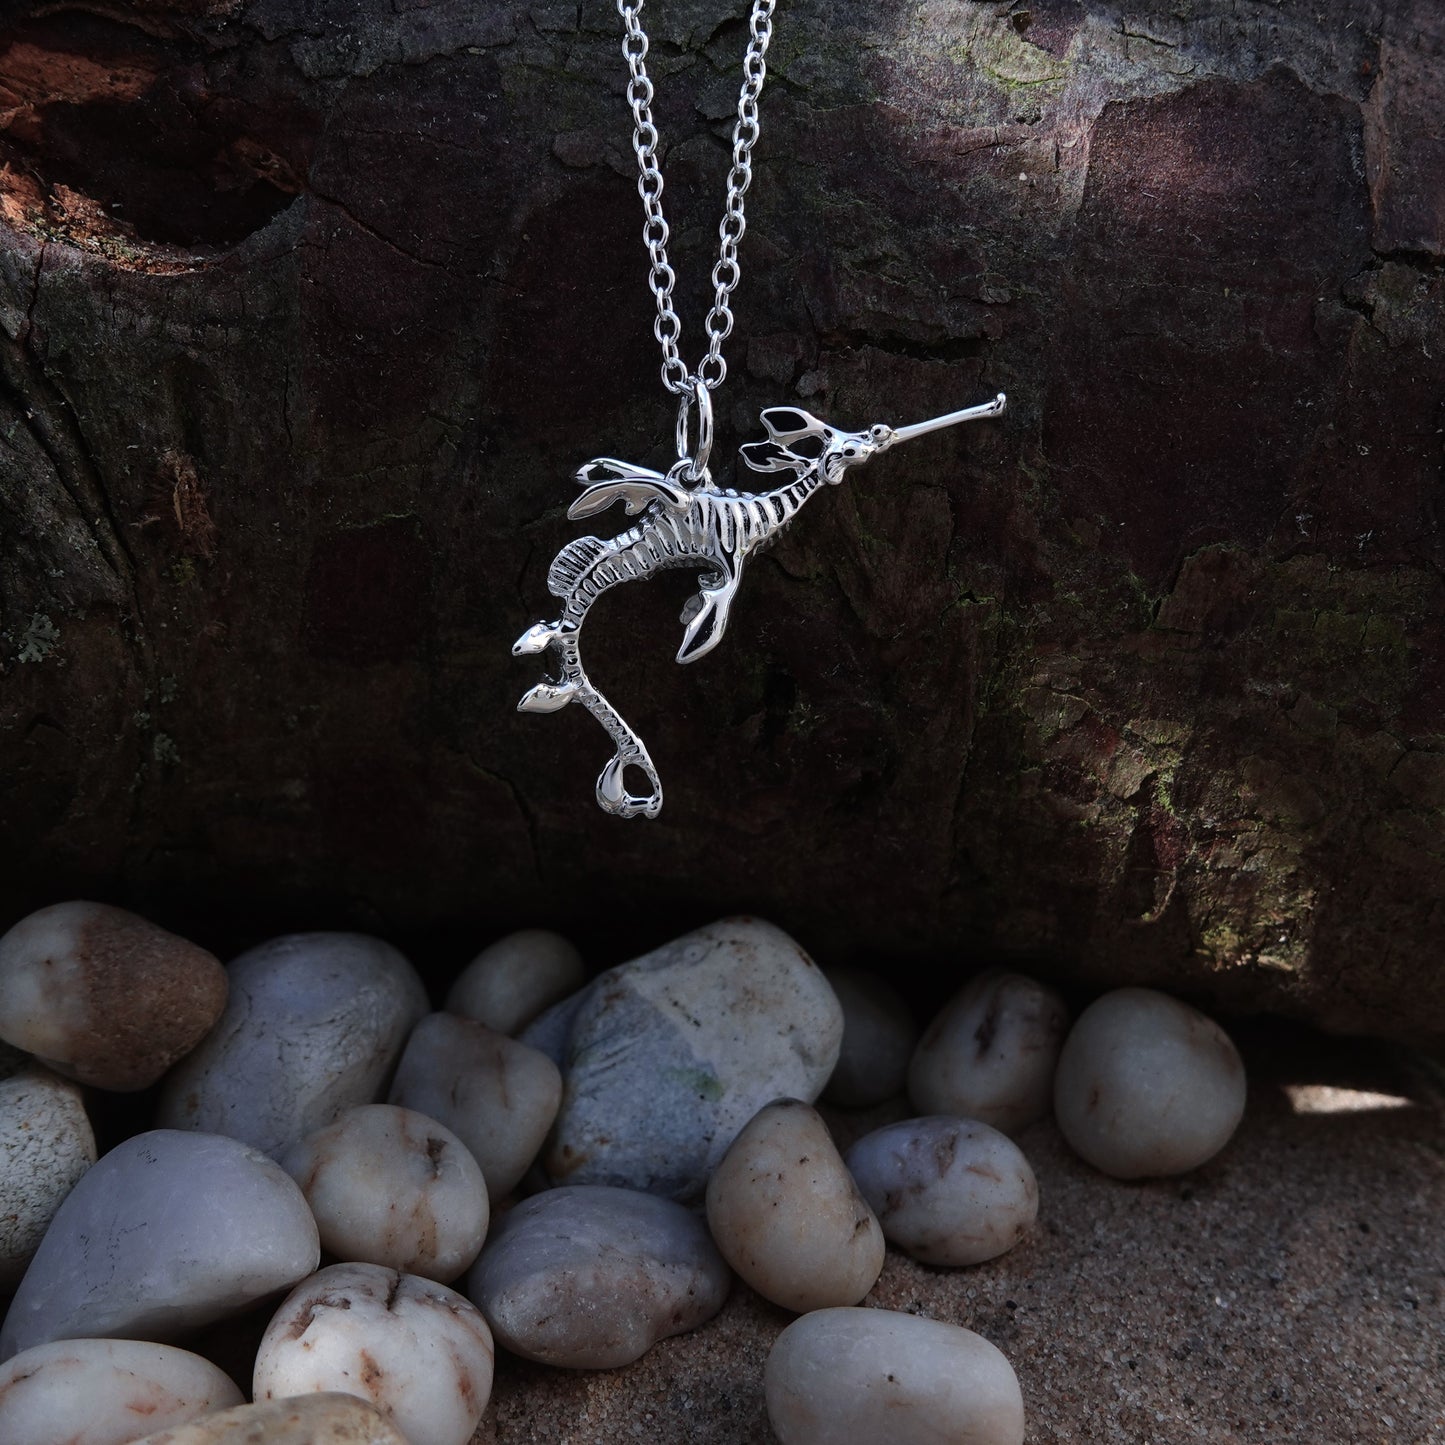 Weedy Sea Dragon necklace. Made from highly polished, tarnish resistant silver, hung on a solid silver chain. © Adrian Ashley